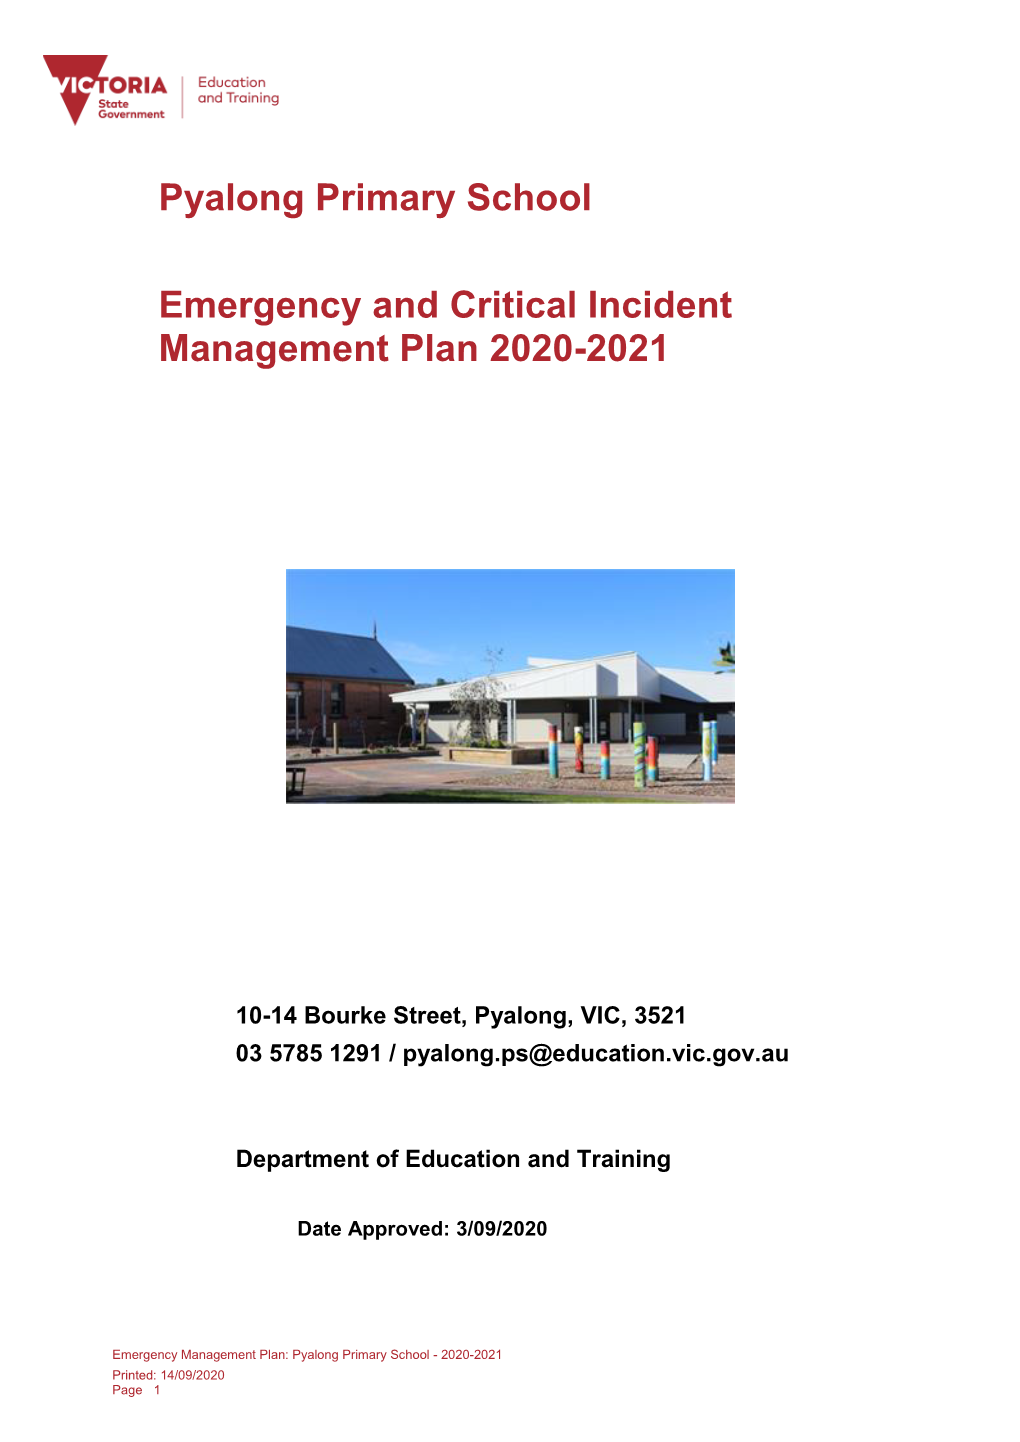 Pyalong Primary School Emergency and Critical Incident Management